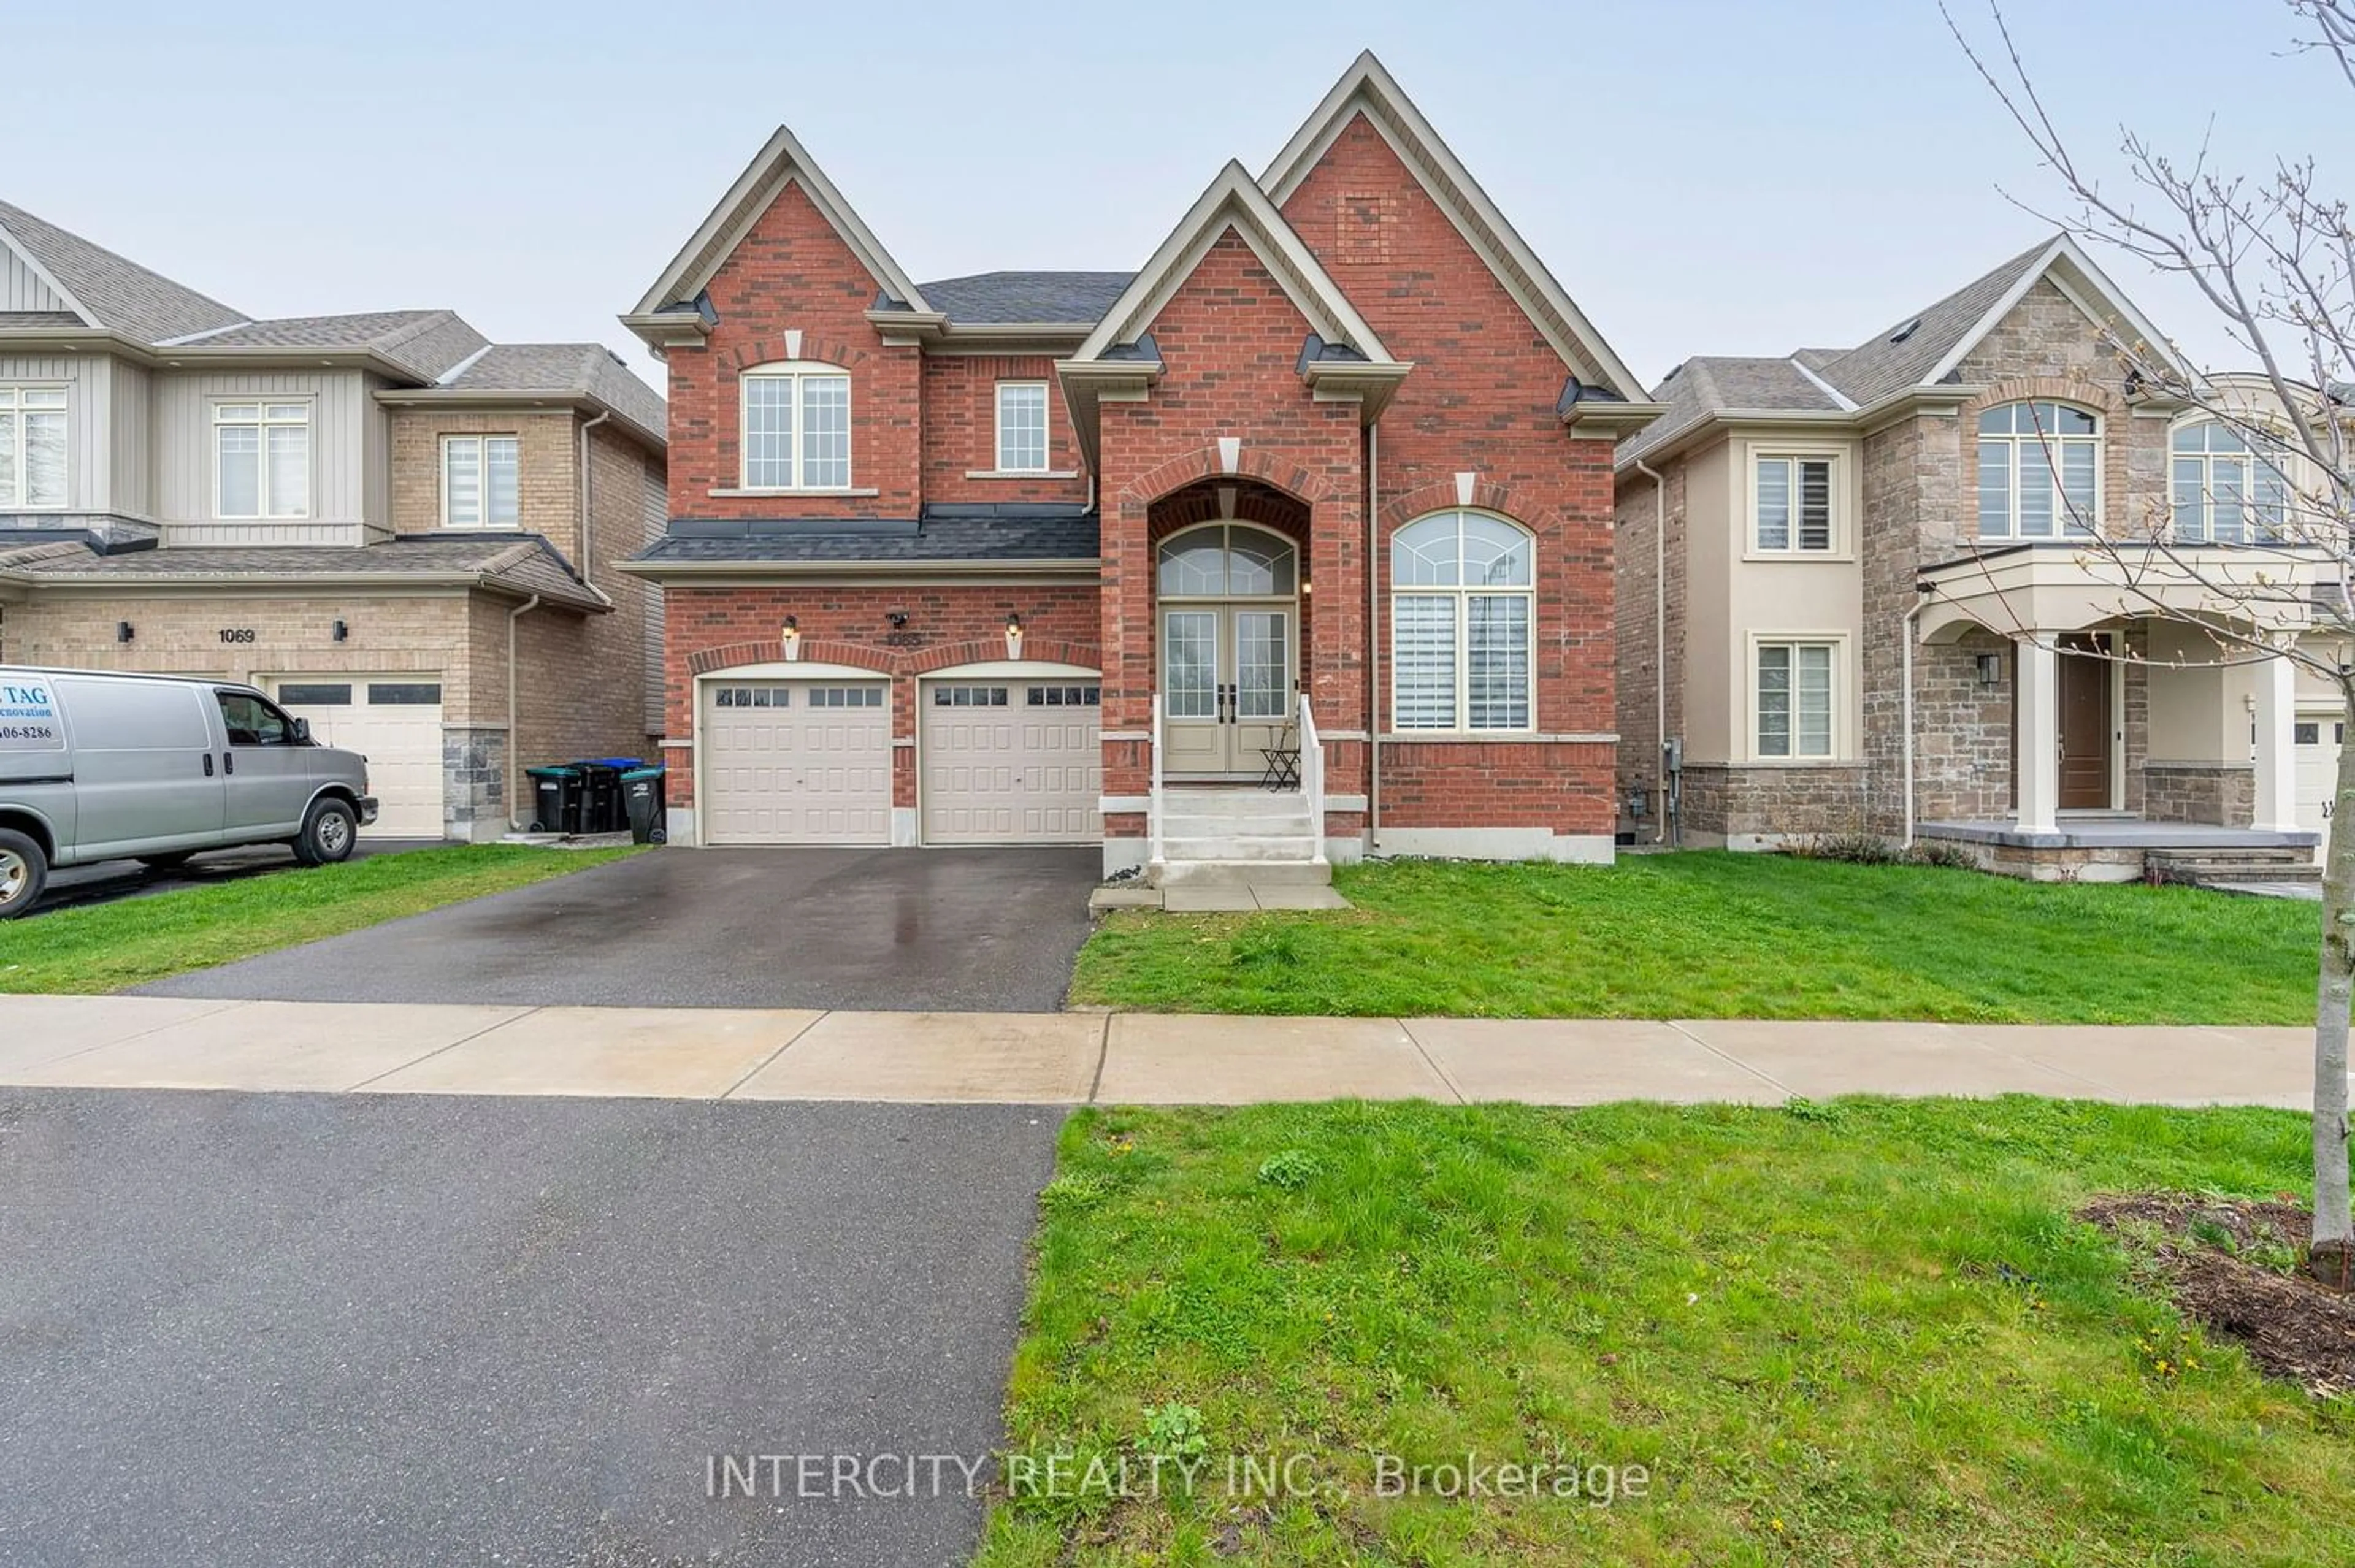 Frontside or backside of a home for 1065 Langford Blvd, Bradford West Gwillimbury Ontario L3Z 0A2